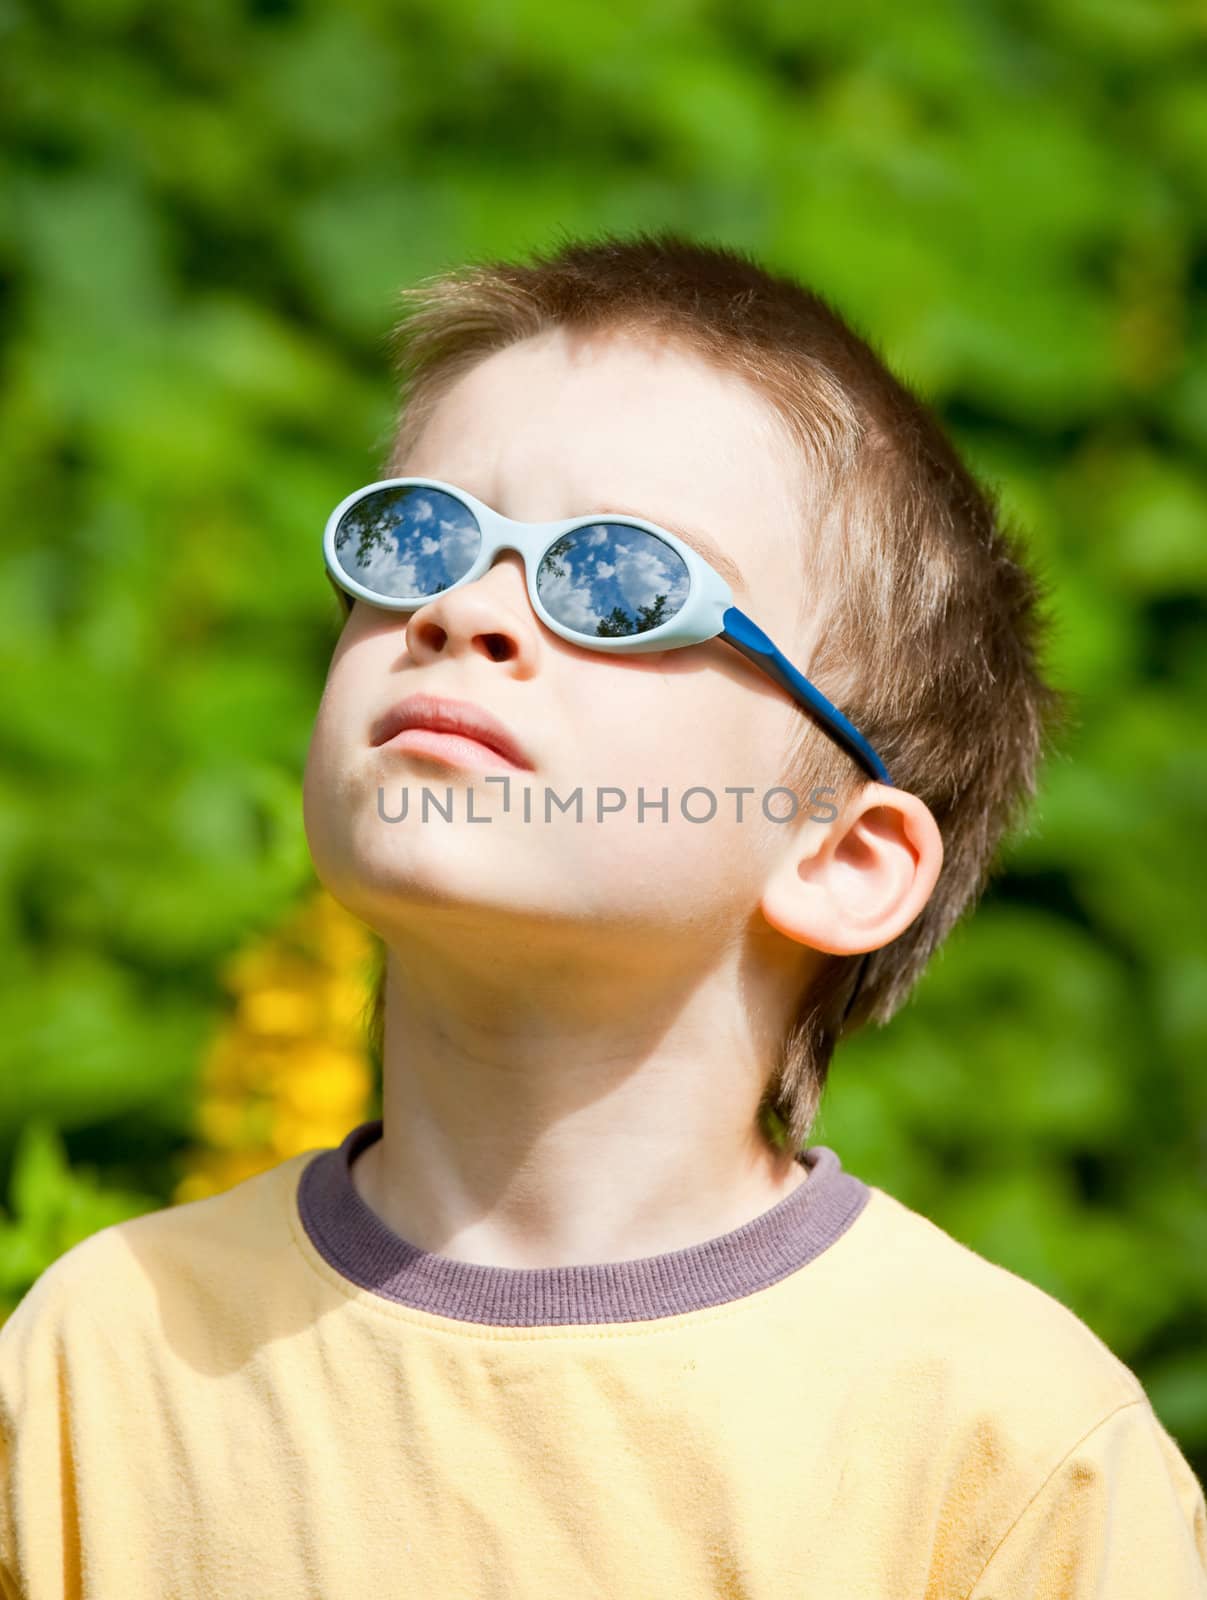 Portrait of a young boy wearing sunglasses outdoors